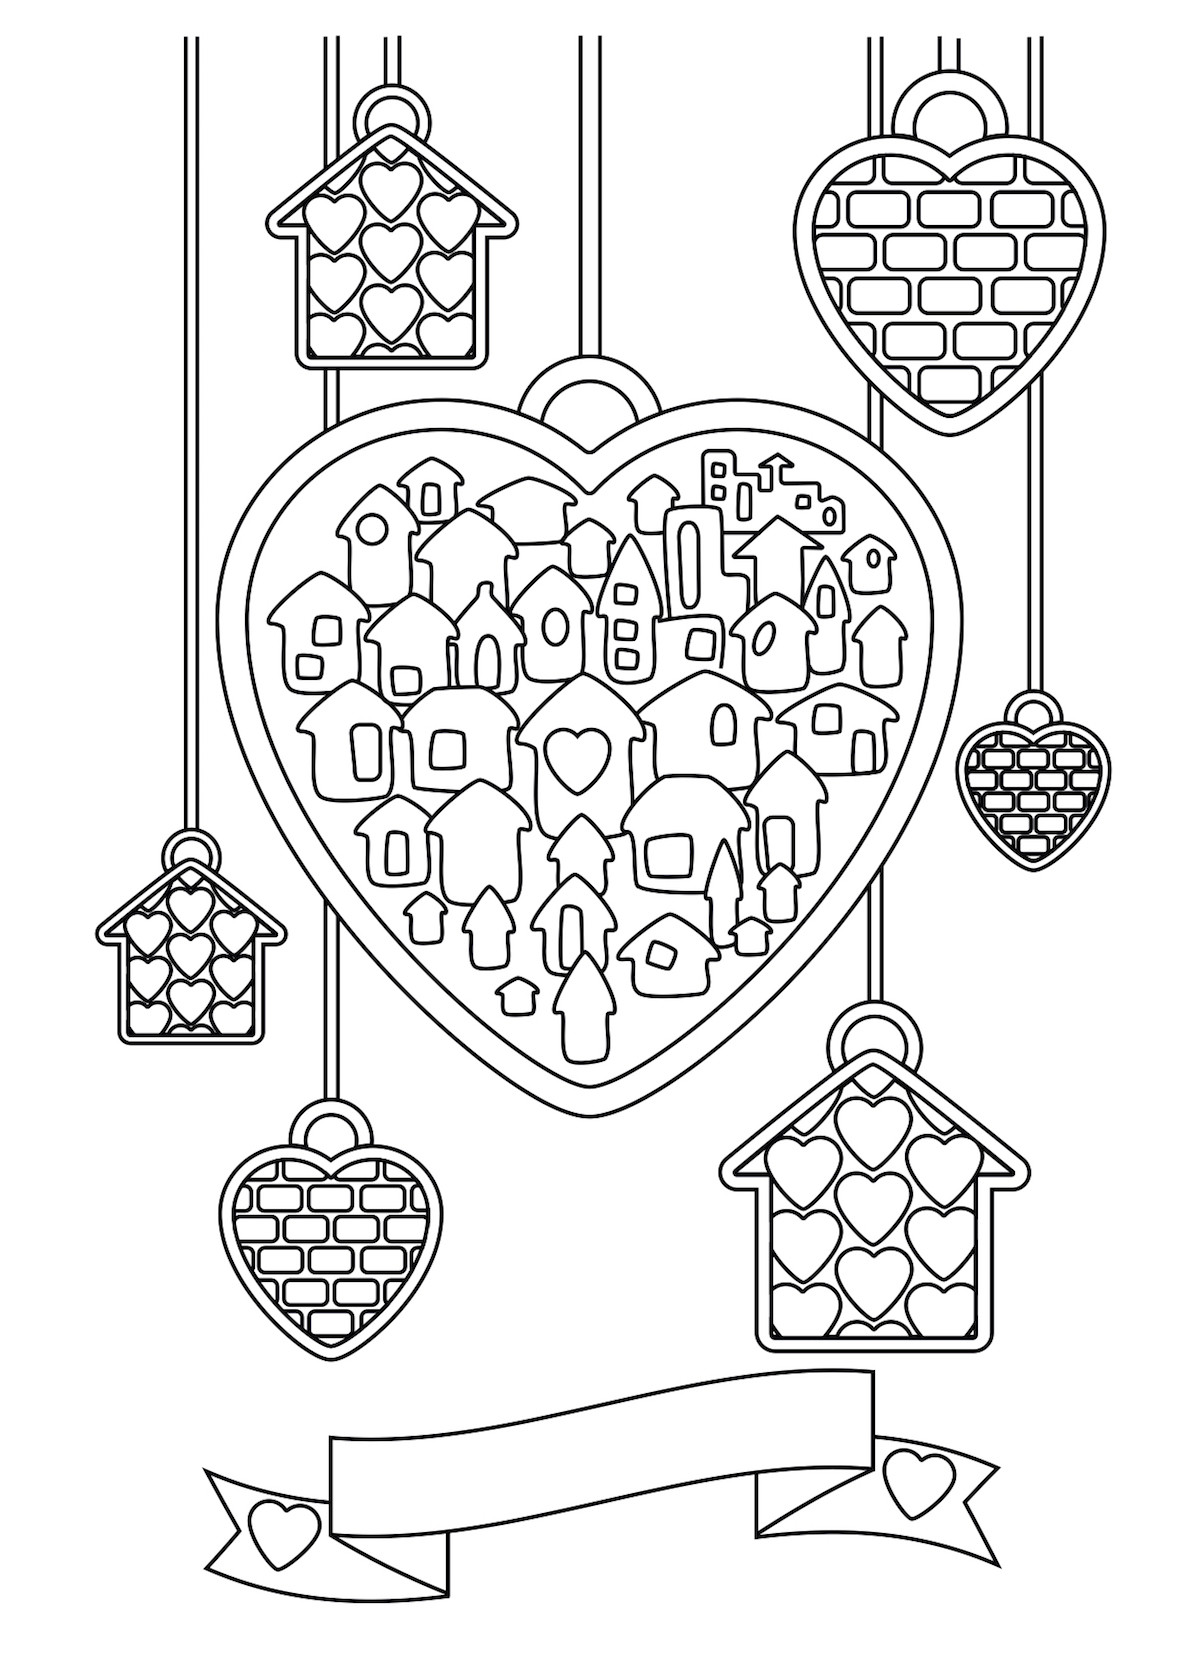 January Coloring Pages
 January Coloring Challenge The Coloring Book Club